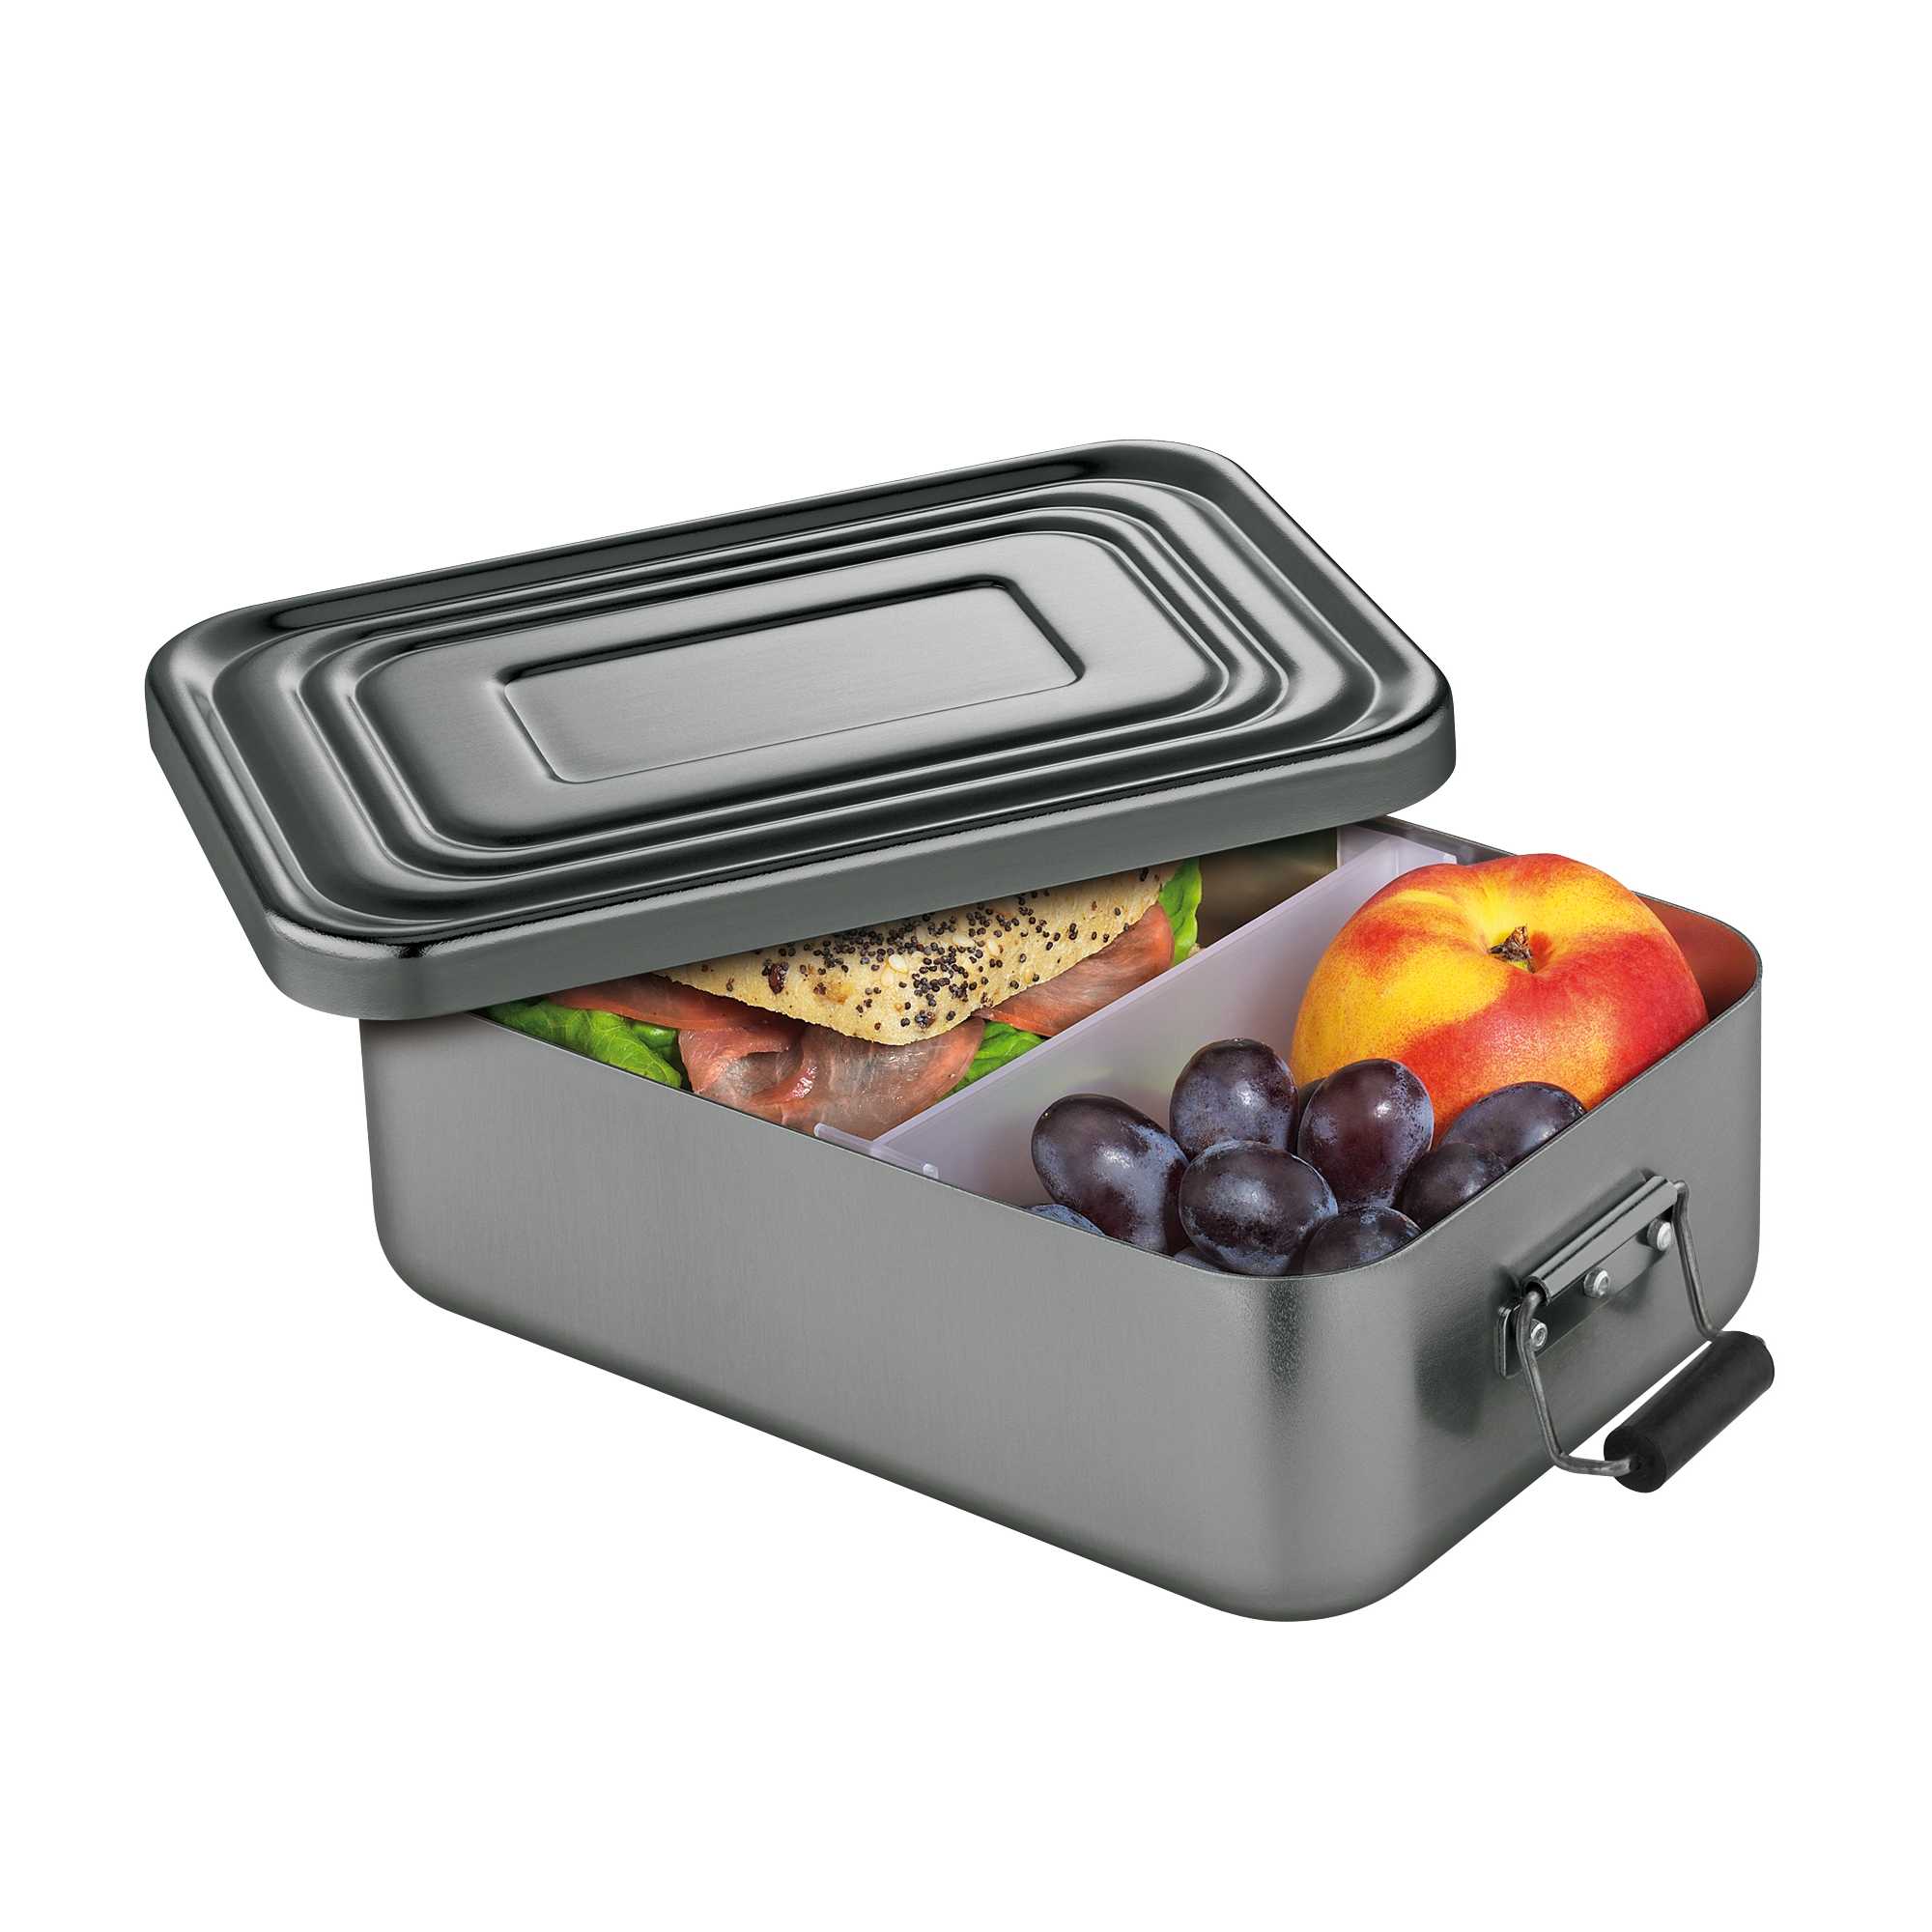 majoor Manieren alleen KÜCHENPROFI lunchbox lunch box 23 x 15 x 7 cm anthracite | Insulating food  containers & lunchboxes | Picnic & outdoors | GRILLING | 1a-Neuware Englisch